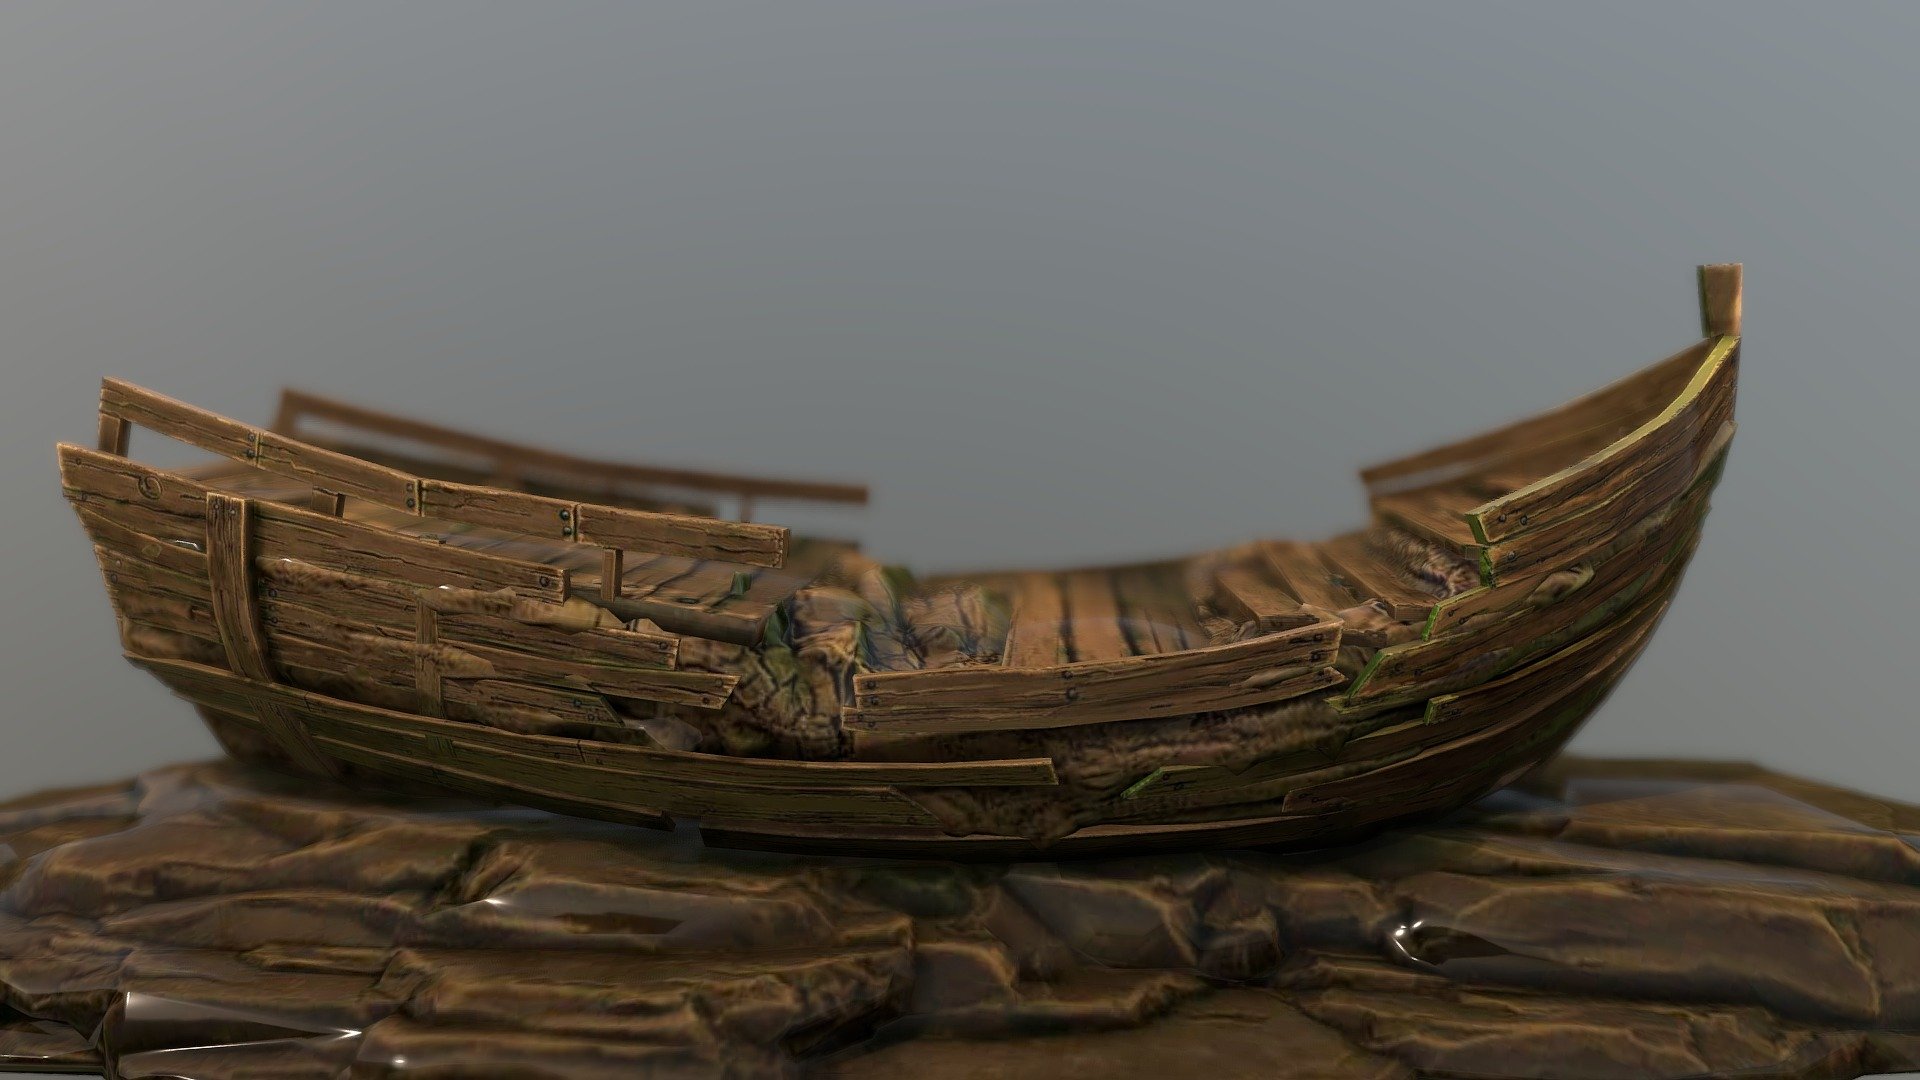 This is the model of a hand-painted galleon shipwreck.
It's excellent for any sea, exploration, historical, VR or post-apocalyptic game or film 3d model